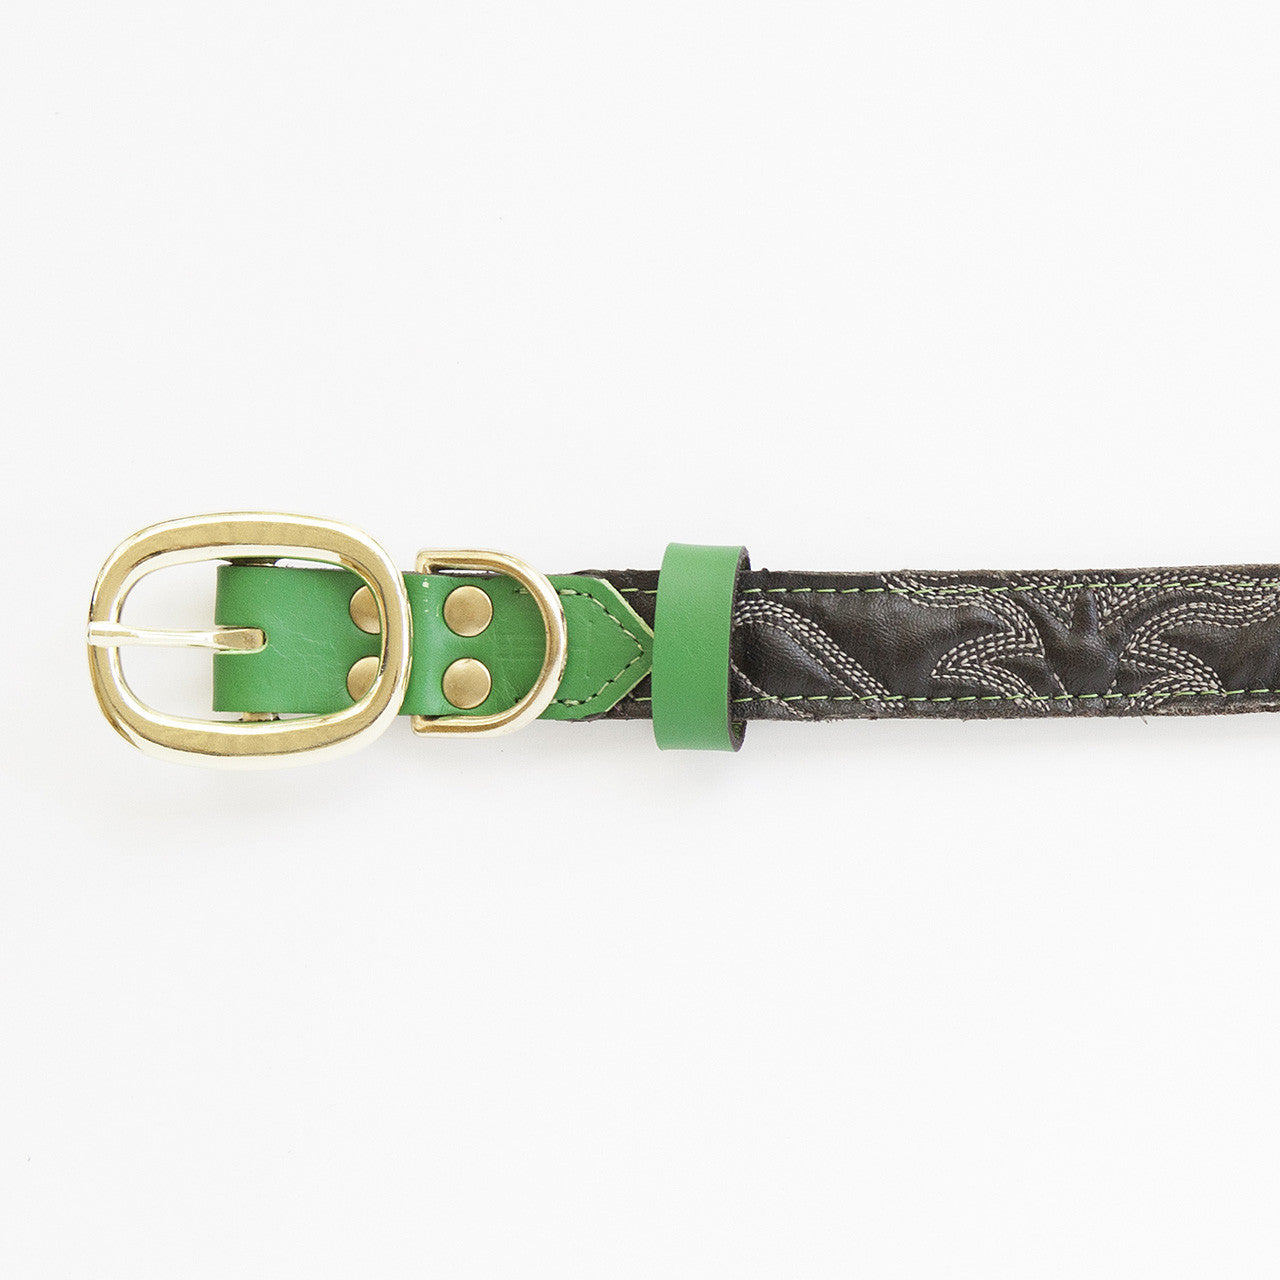 Emerald Green Dog Collar with Black Leather + White Stitching (buckle)